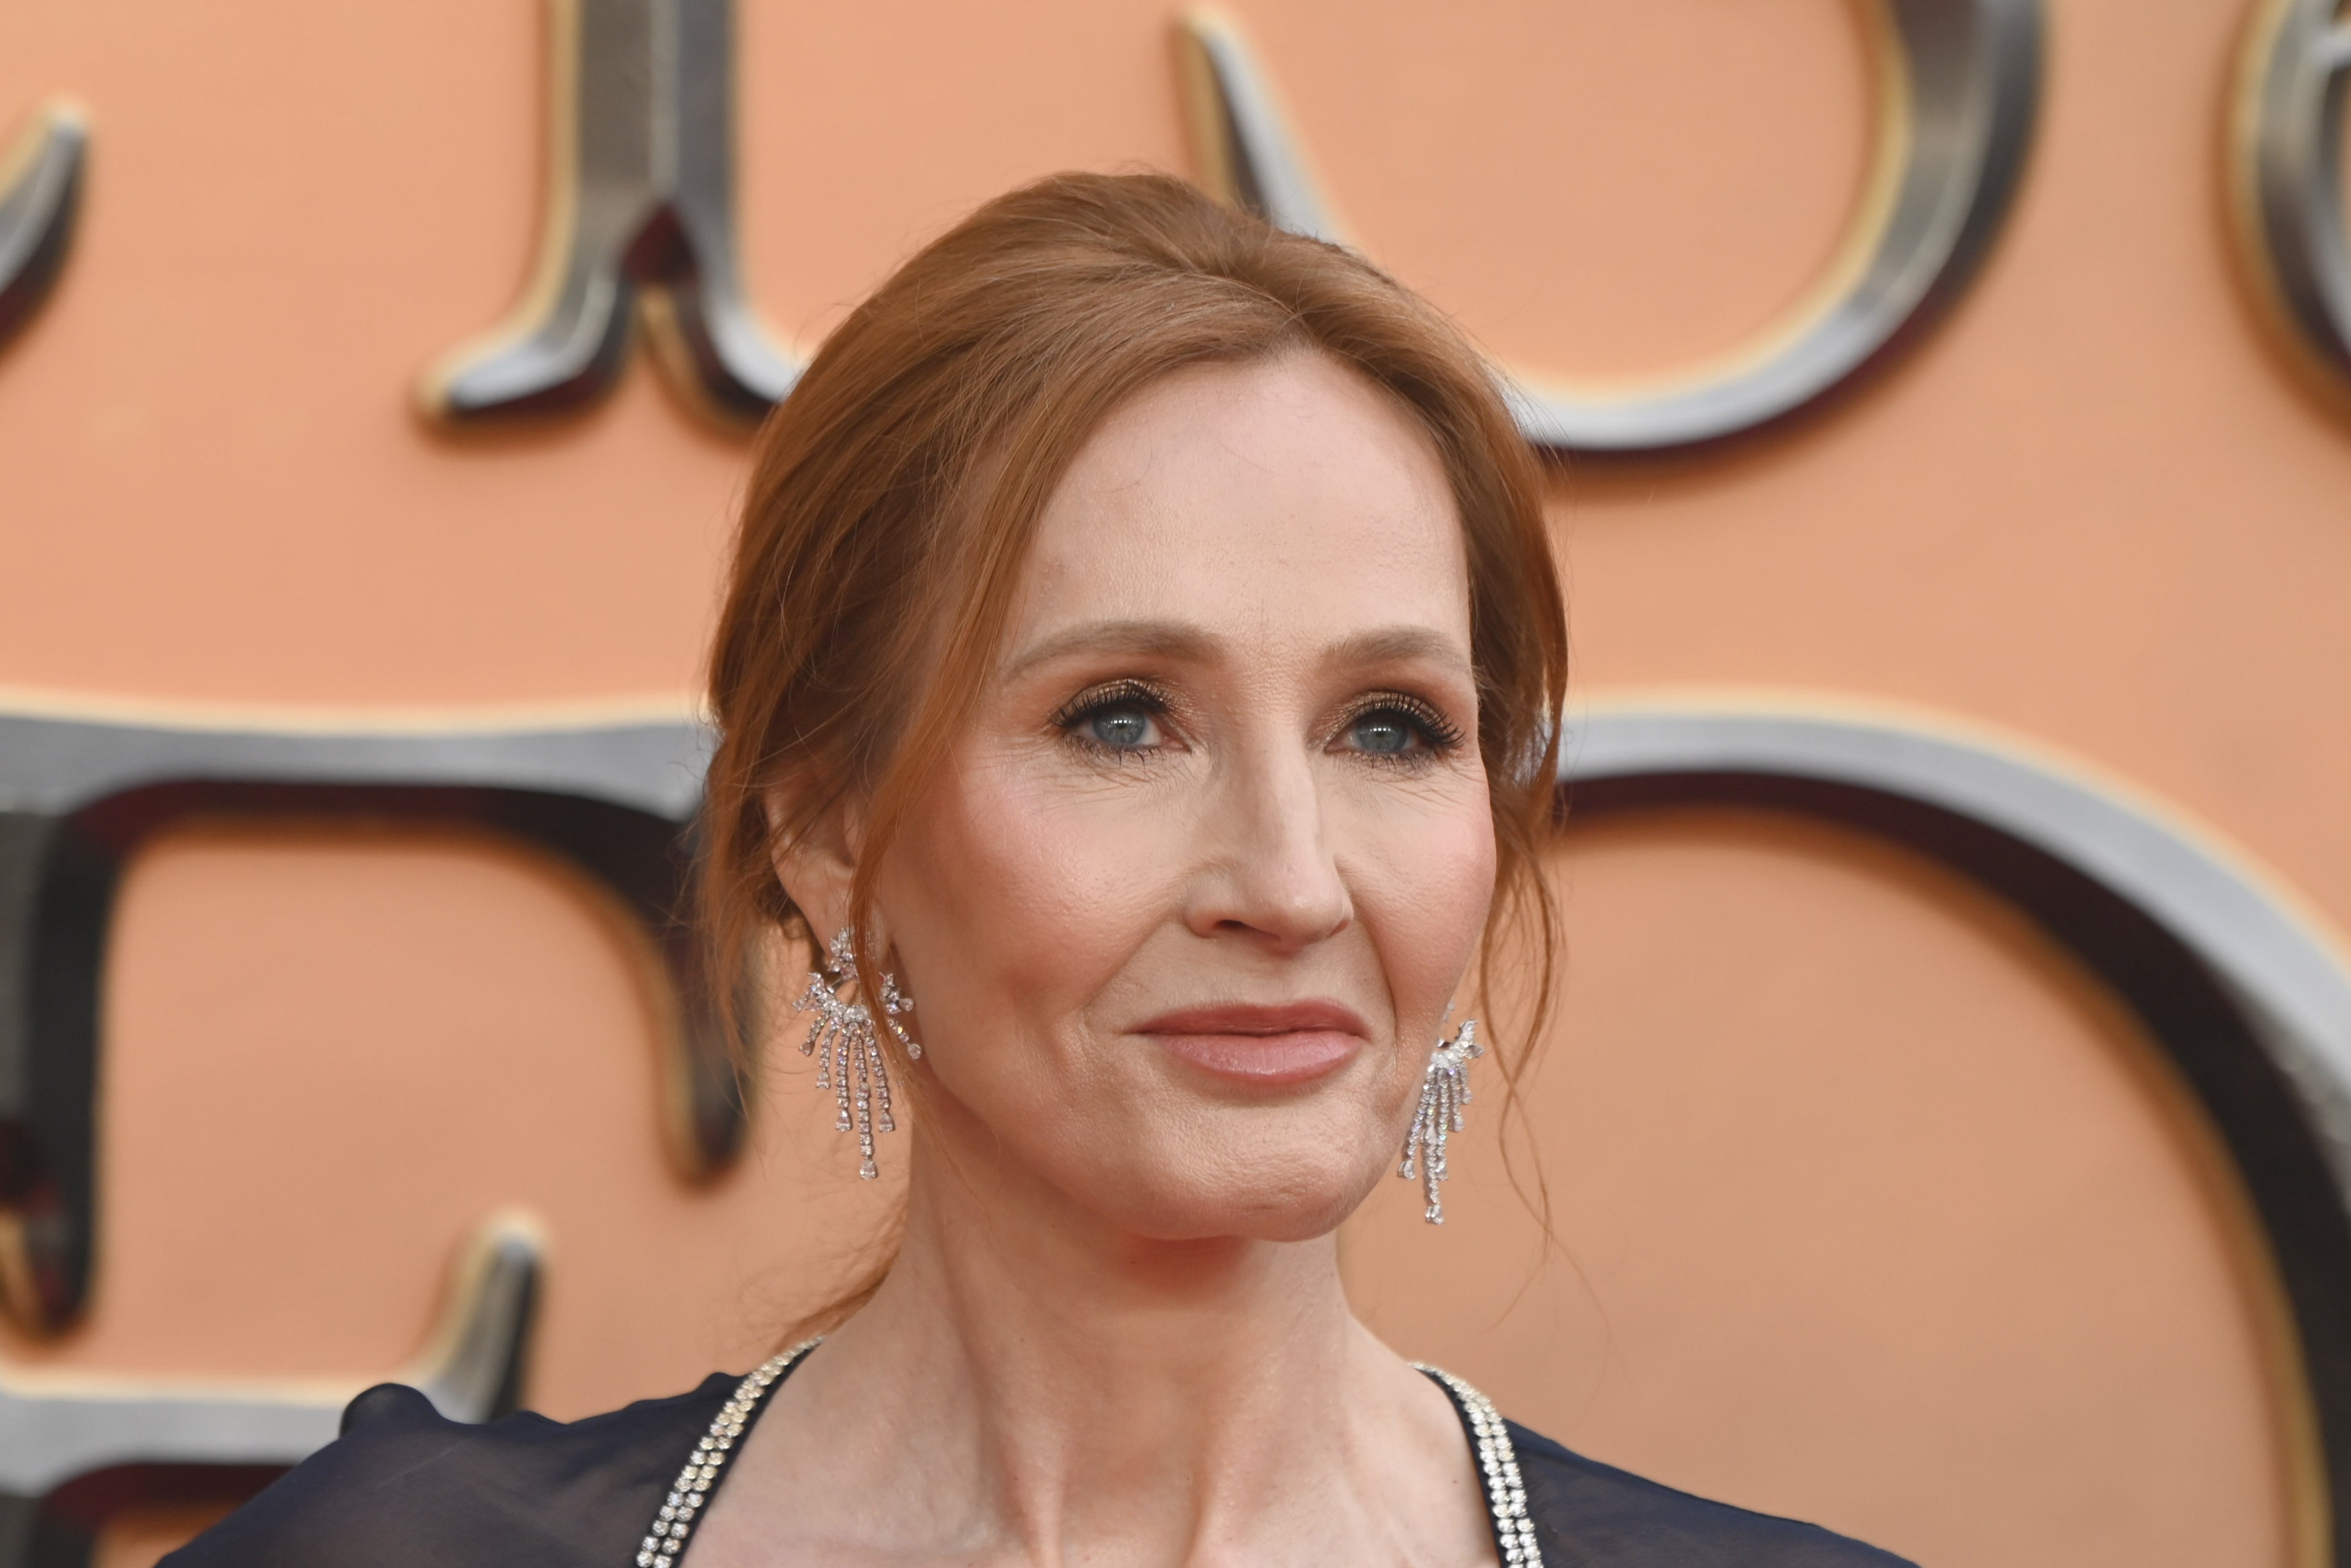 Rowling said her loved one’s pleas held her back from publicly sharing controversial views on trans women